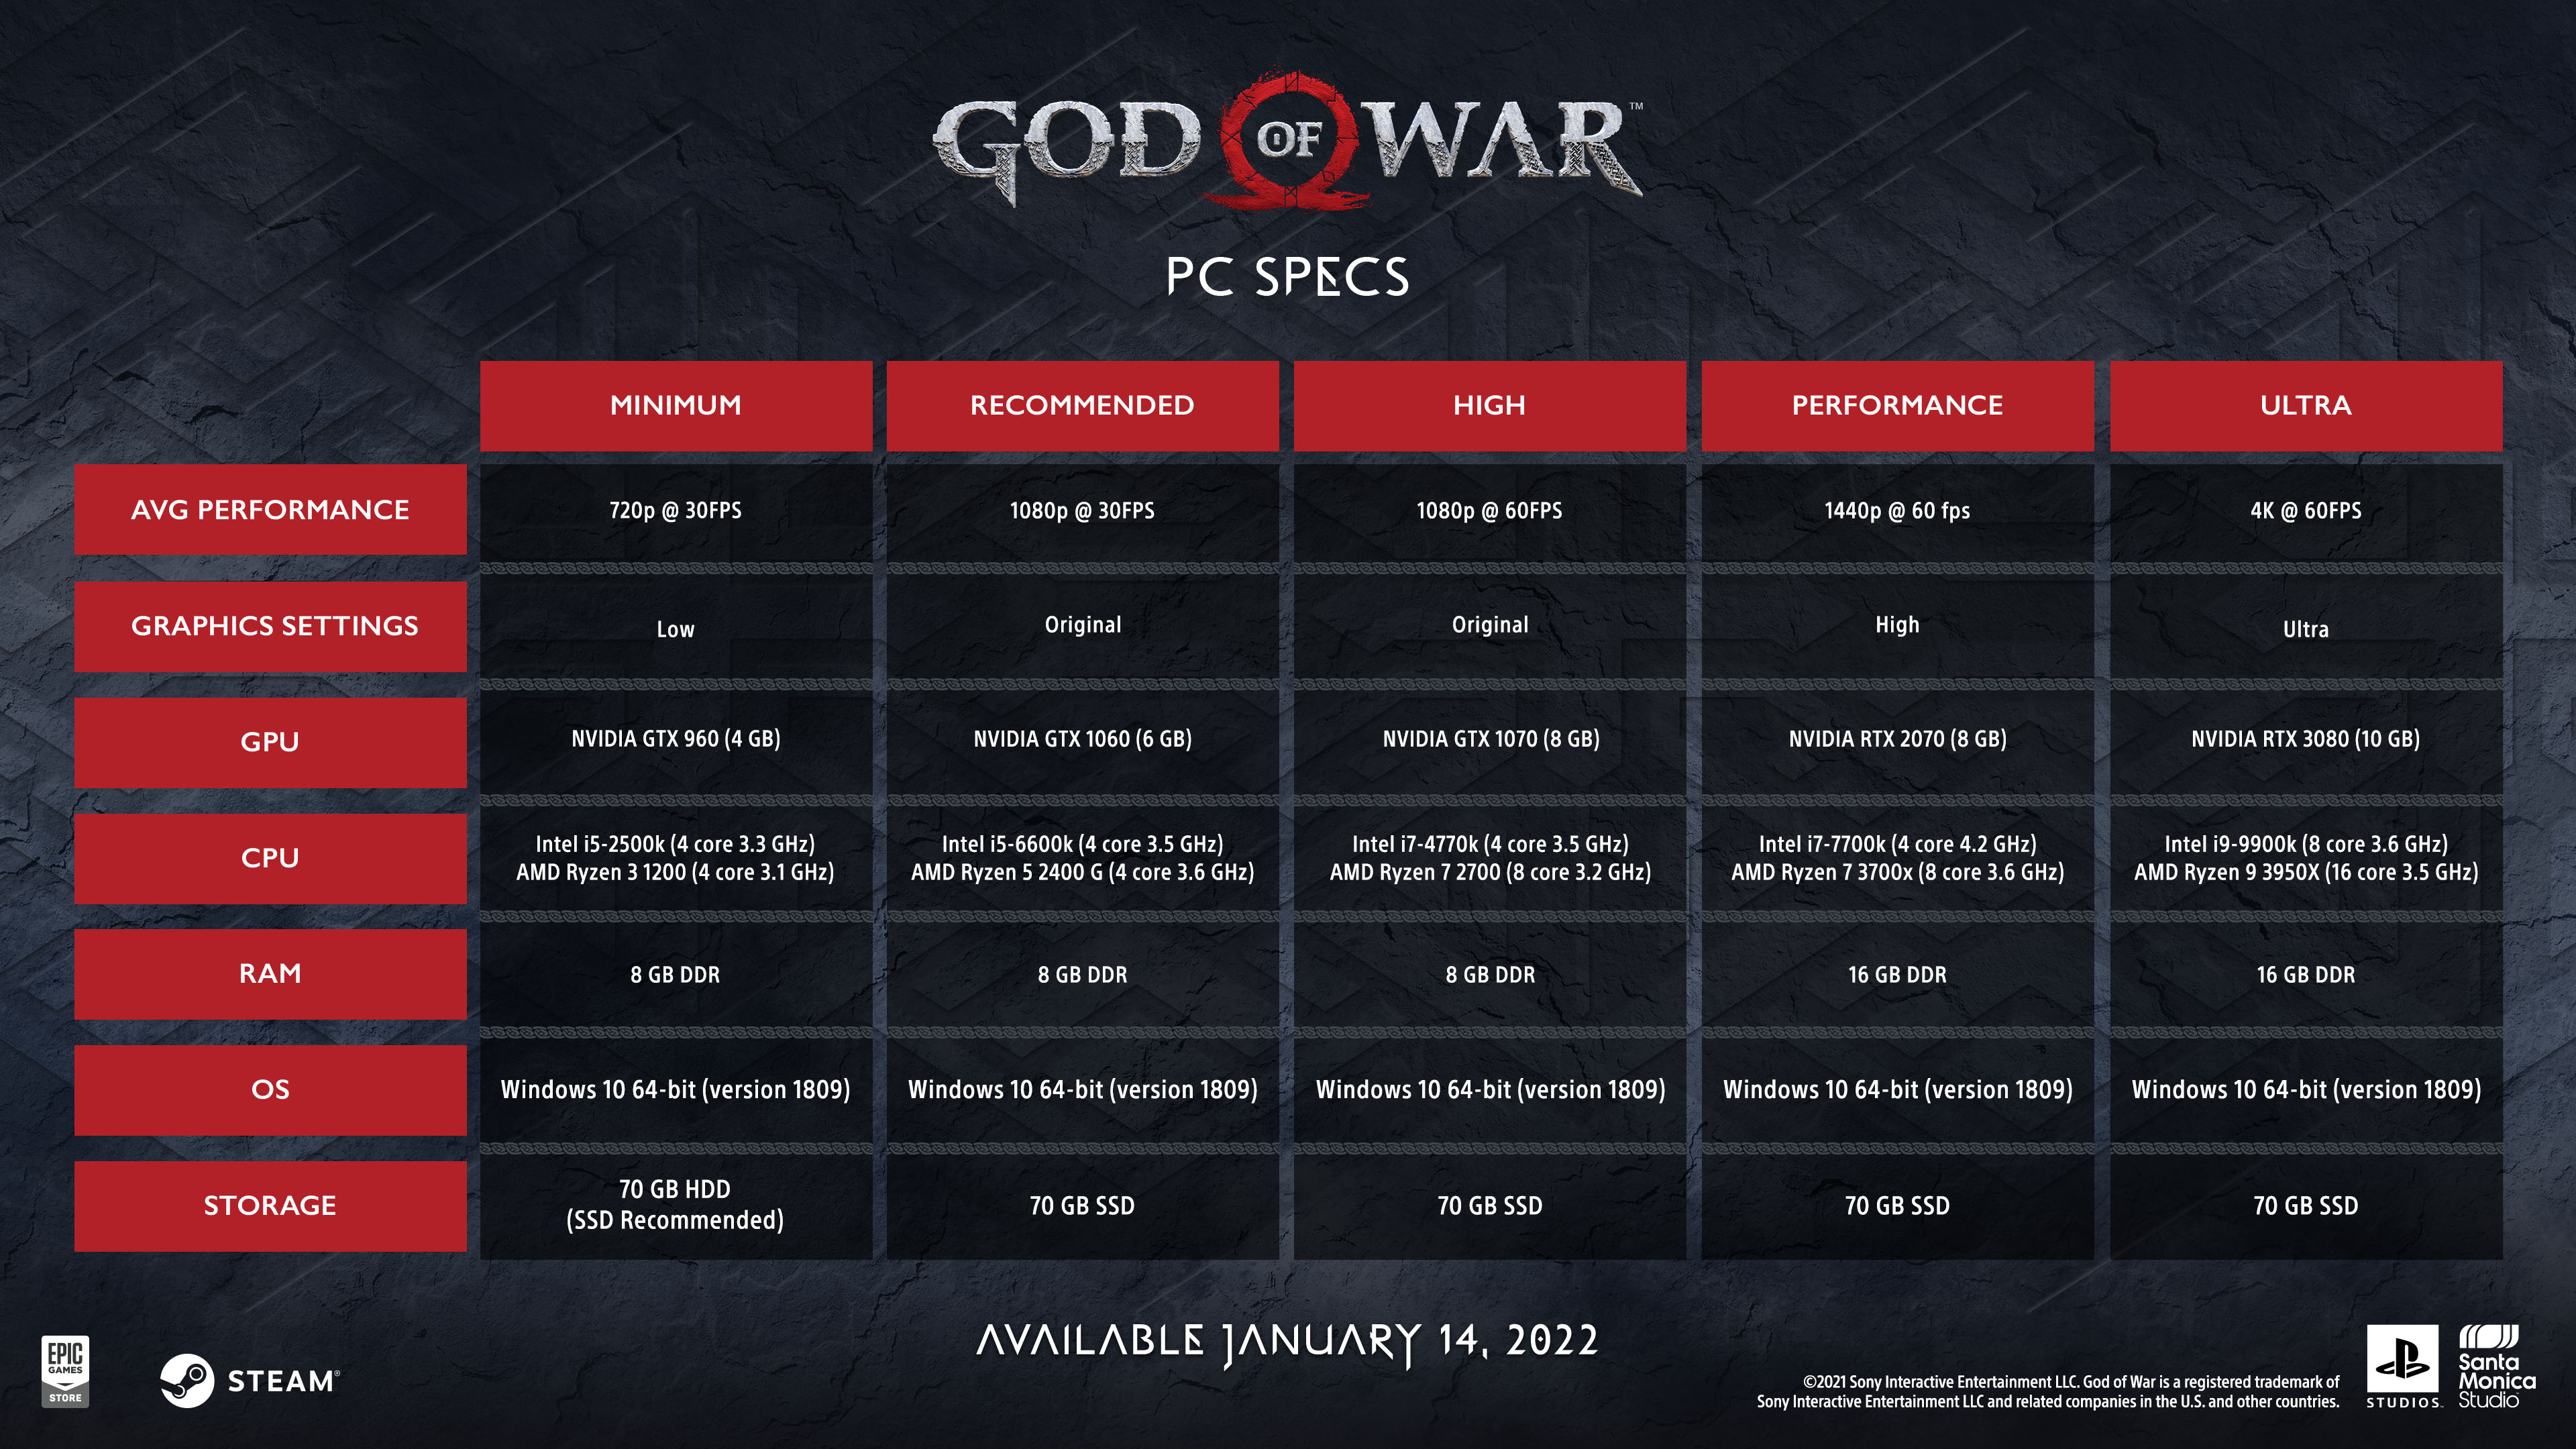 God of War PC Version Spotted in GeForce Now Database, Suggesting